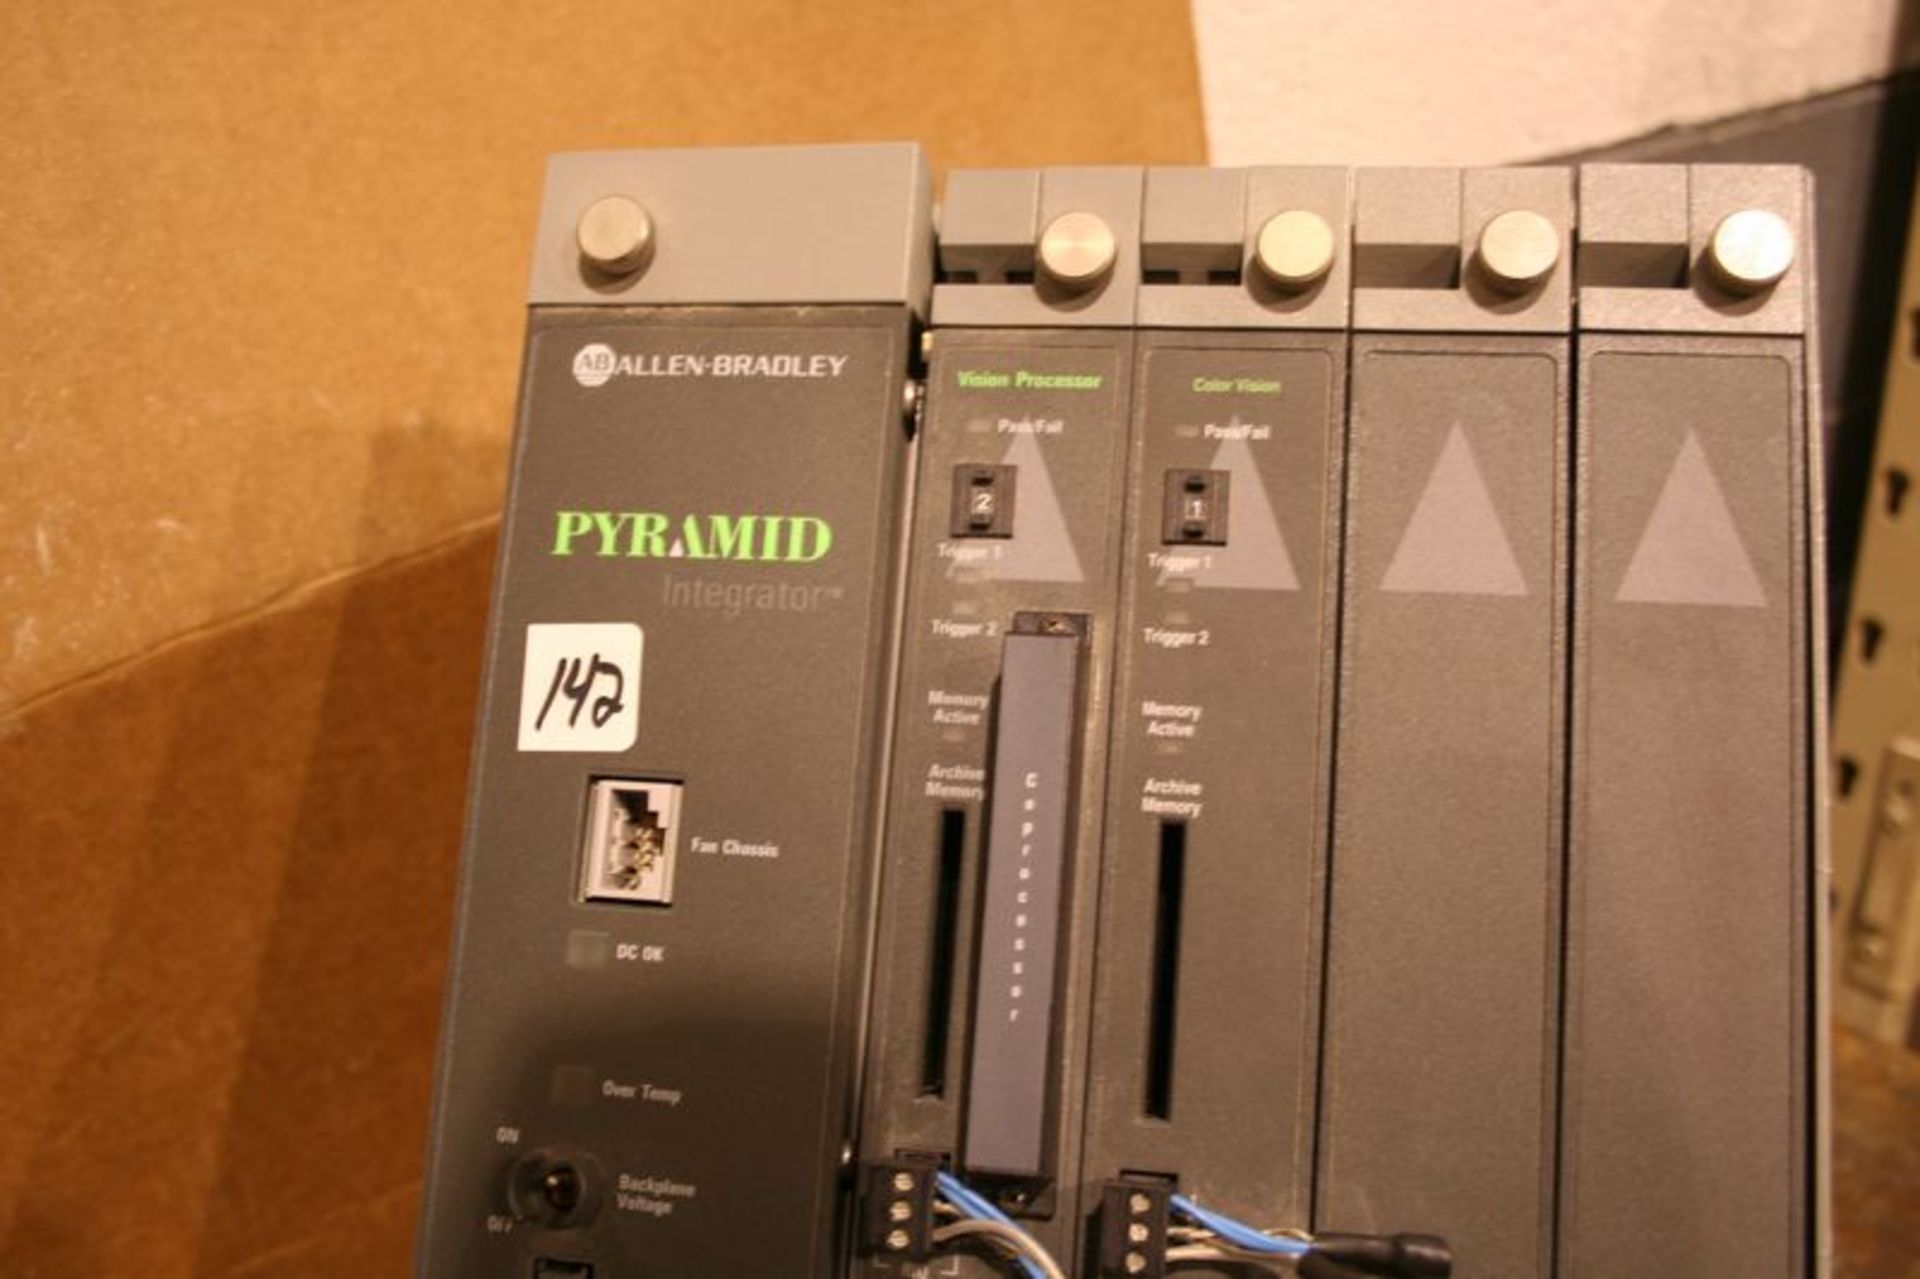 AB PYRAMID Integrator with Vision Processor and Color Vision Cards - Image 2 of 2